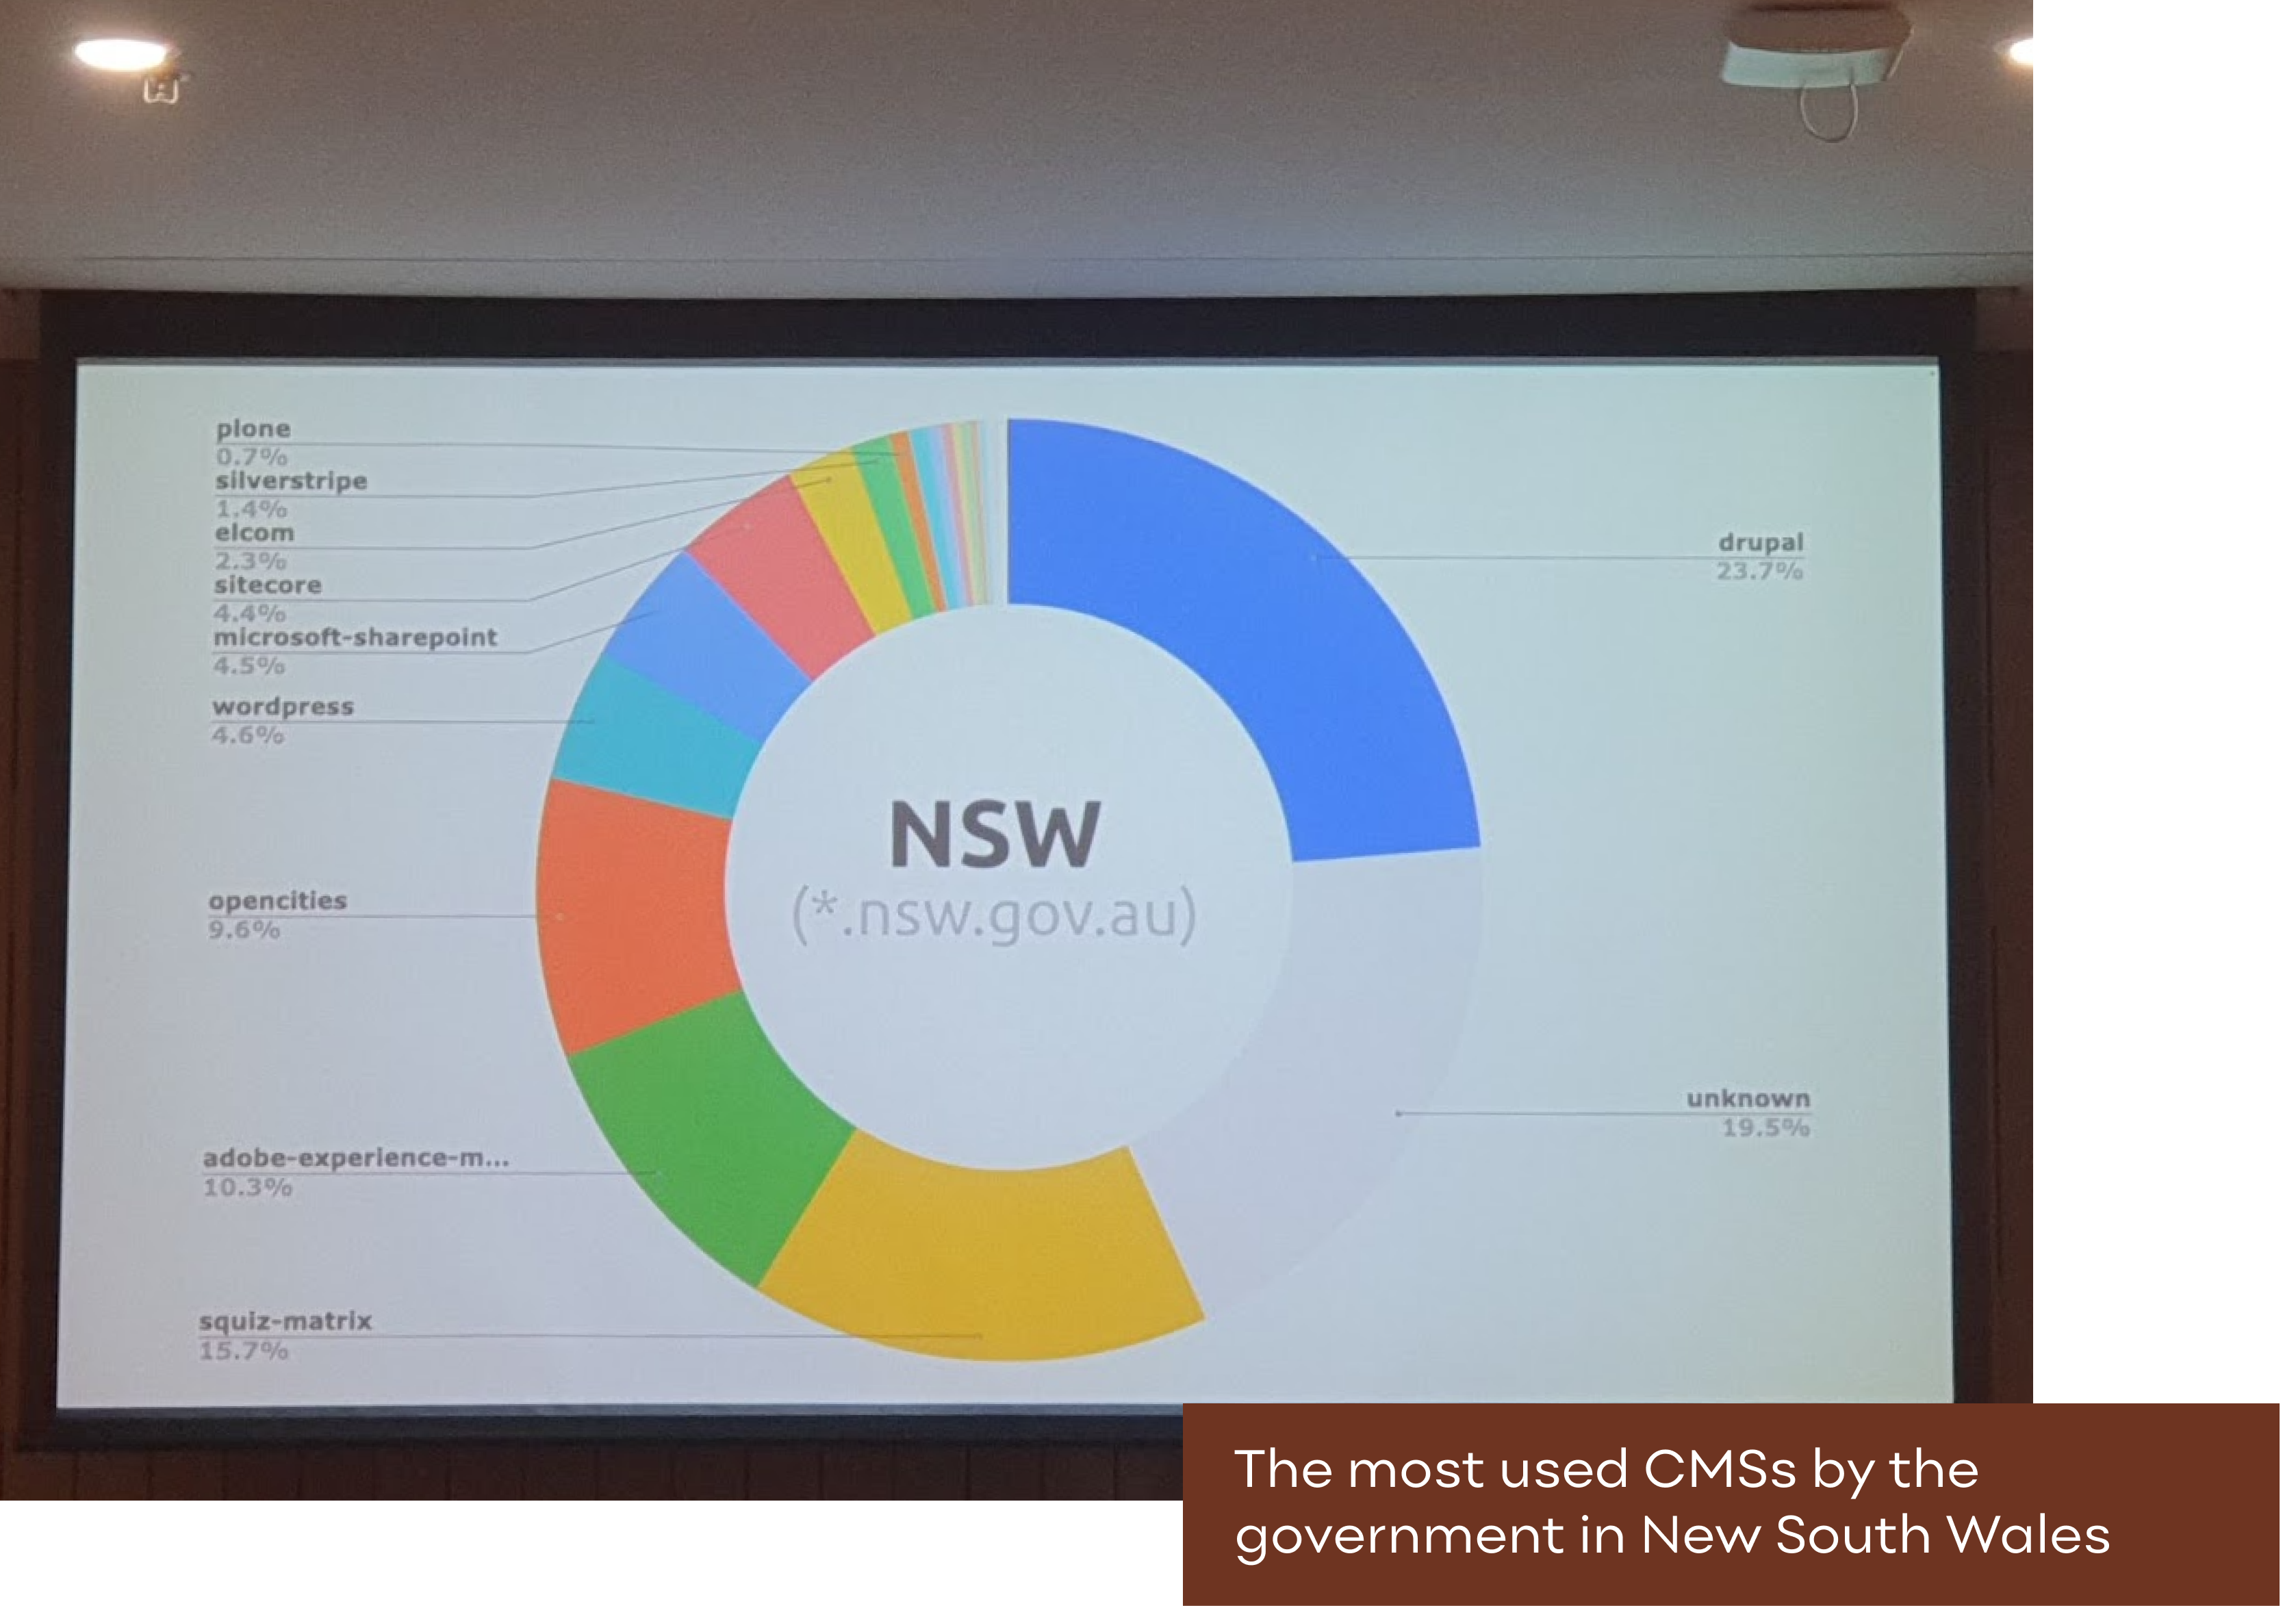 The most used CMSs by the government in NSW